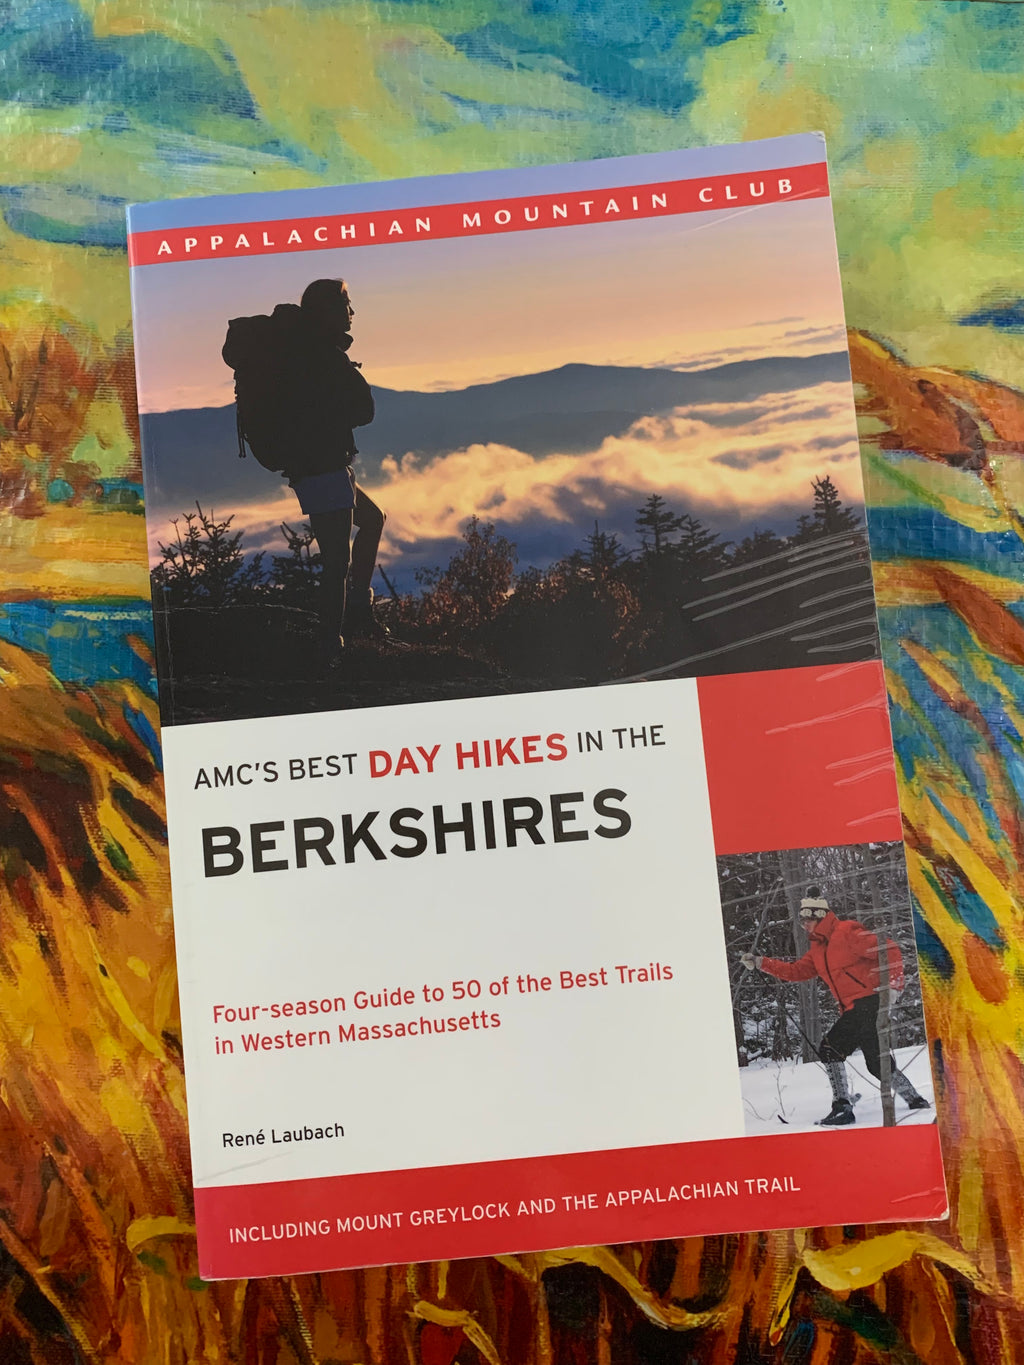 AMC's Best Day Hikes in the Berkshires- By Rene Laubach